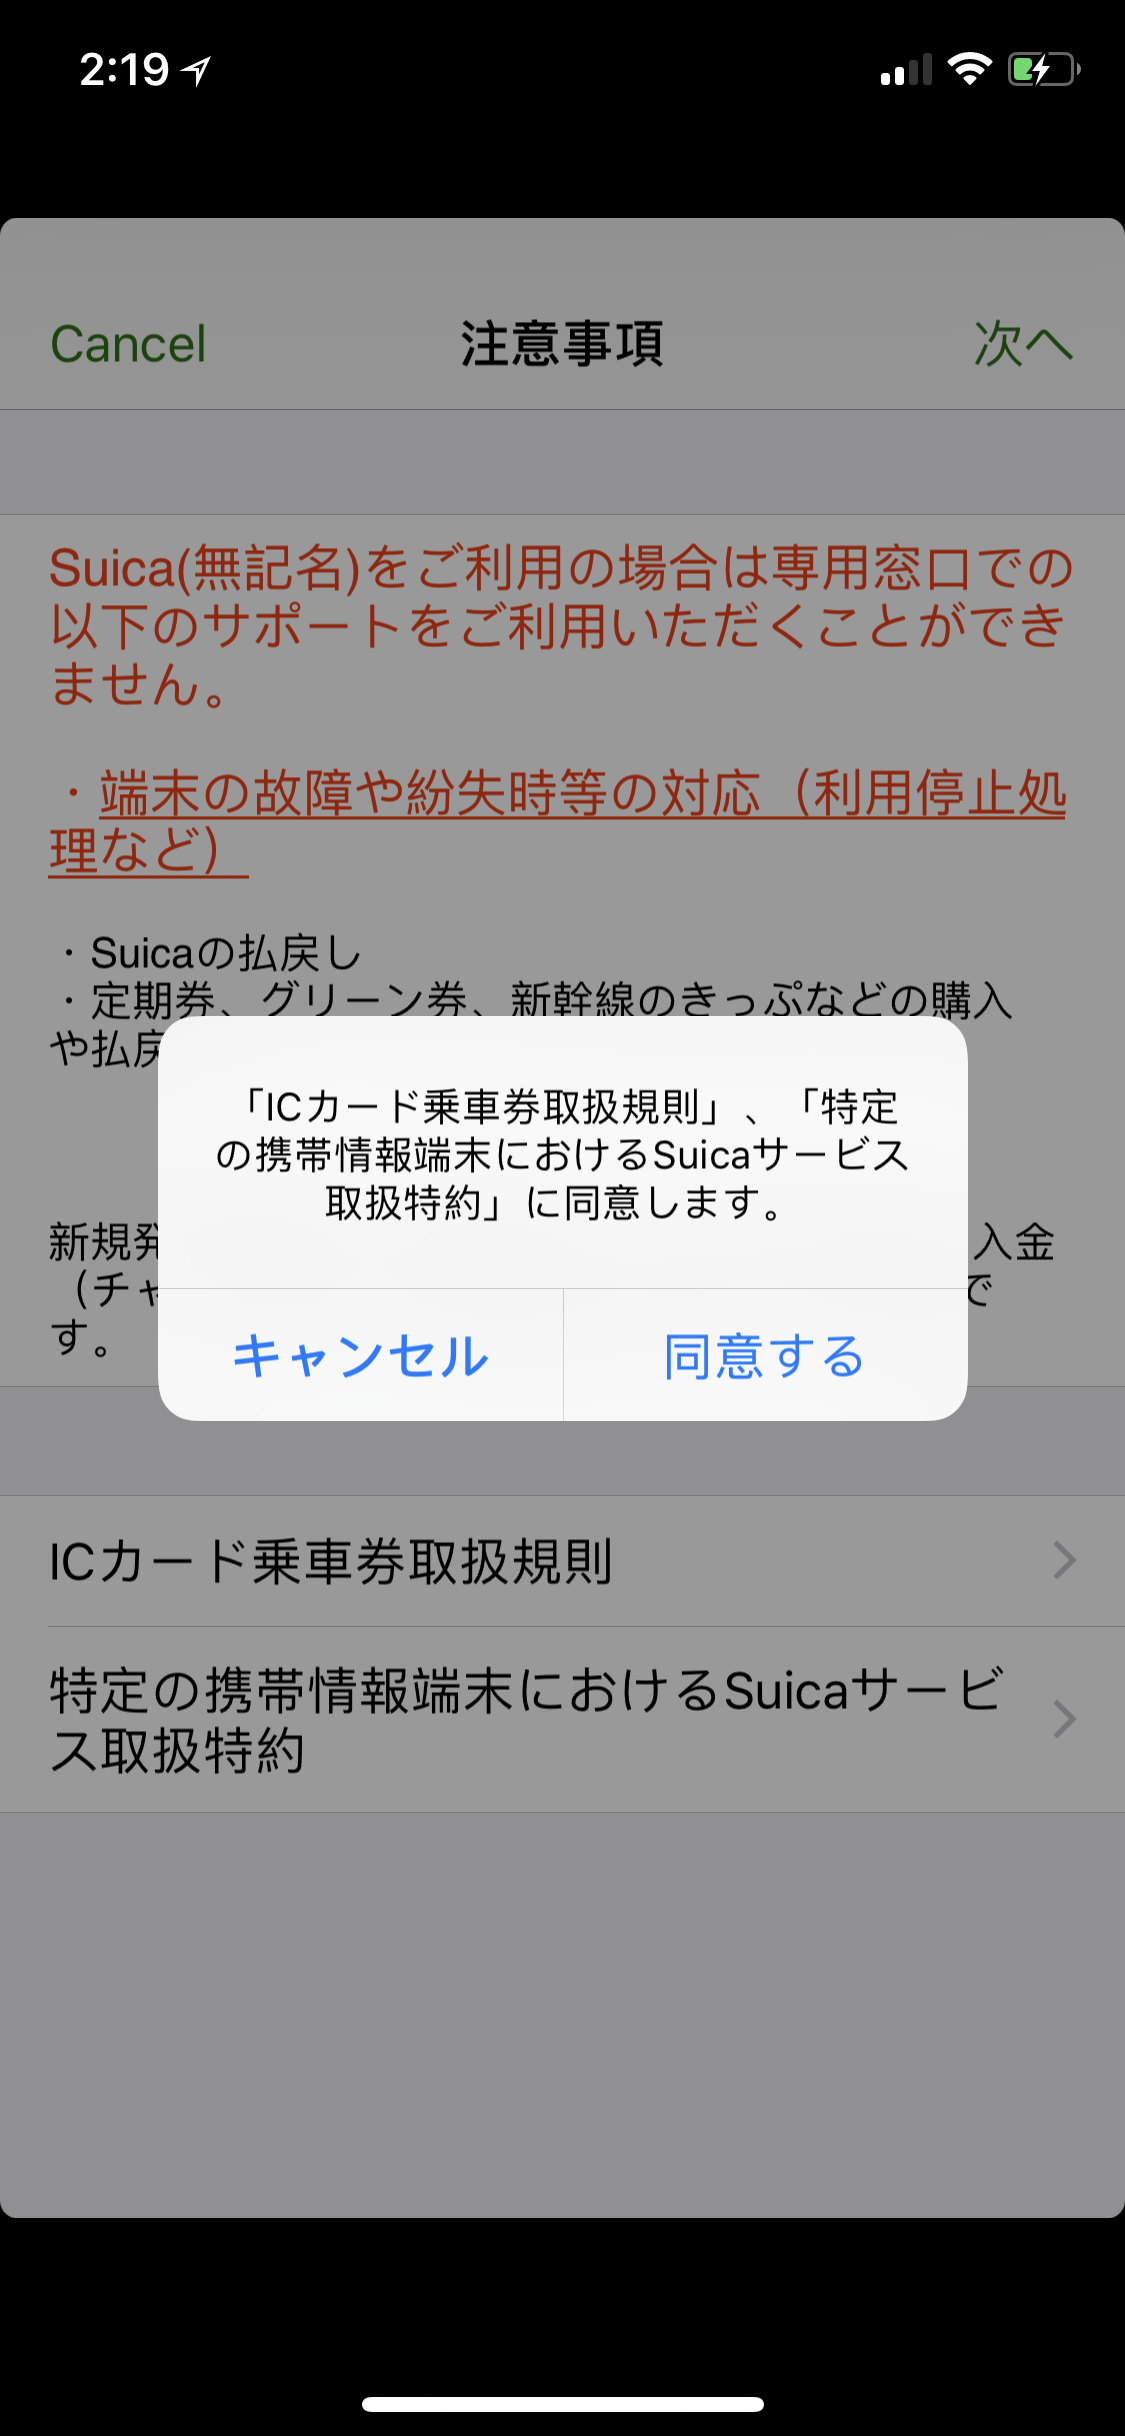 Screenshot of the Suica app with Japanese text in alert